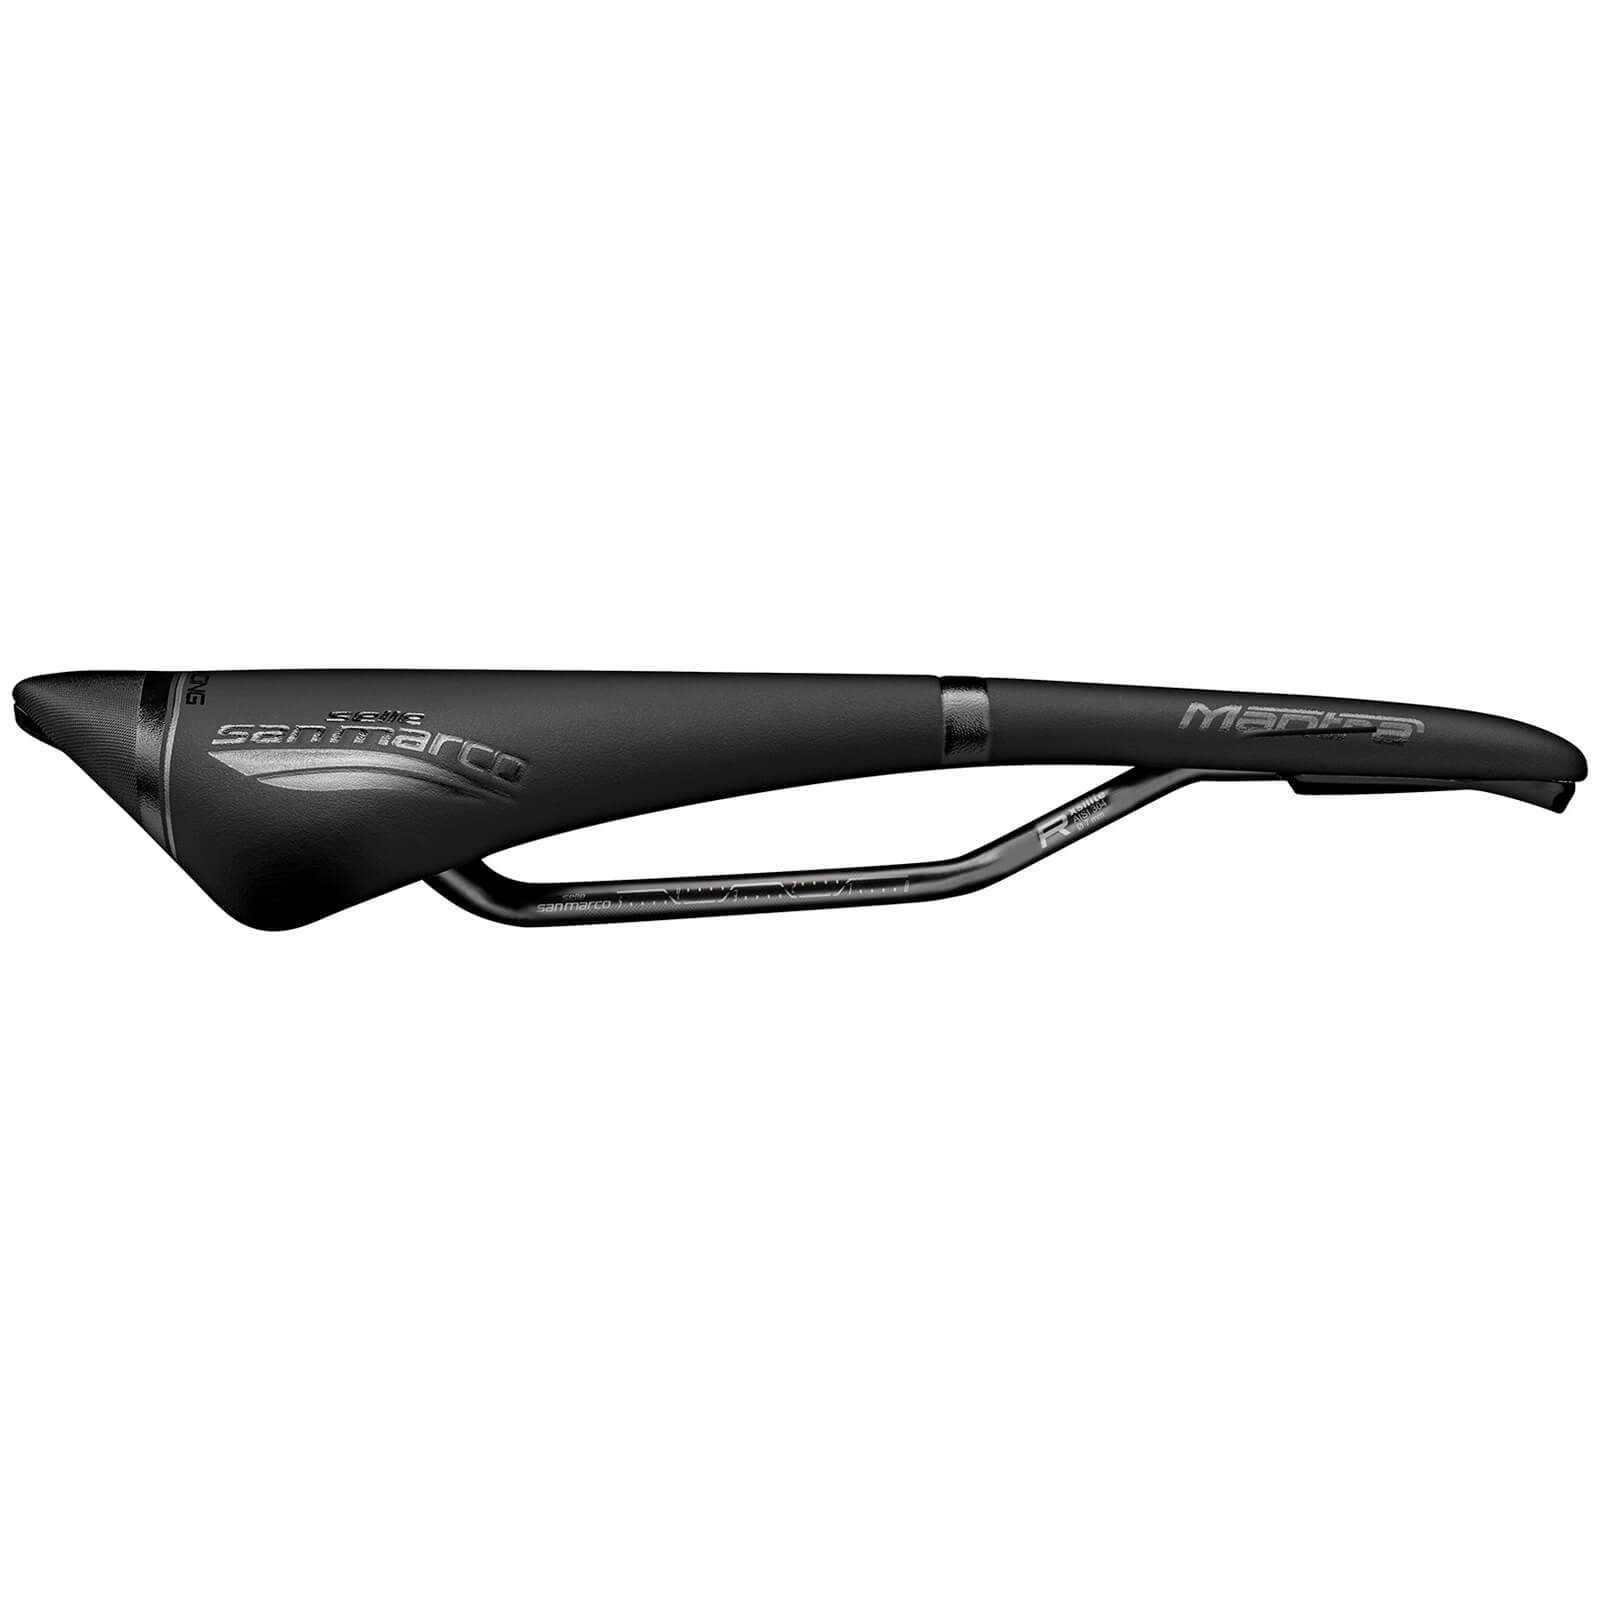 Selle San Marco Mantra Open-Fit Racing Saddle - Wide - L2 - Black